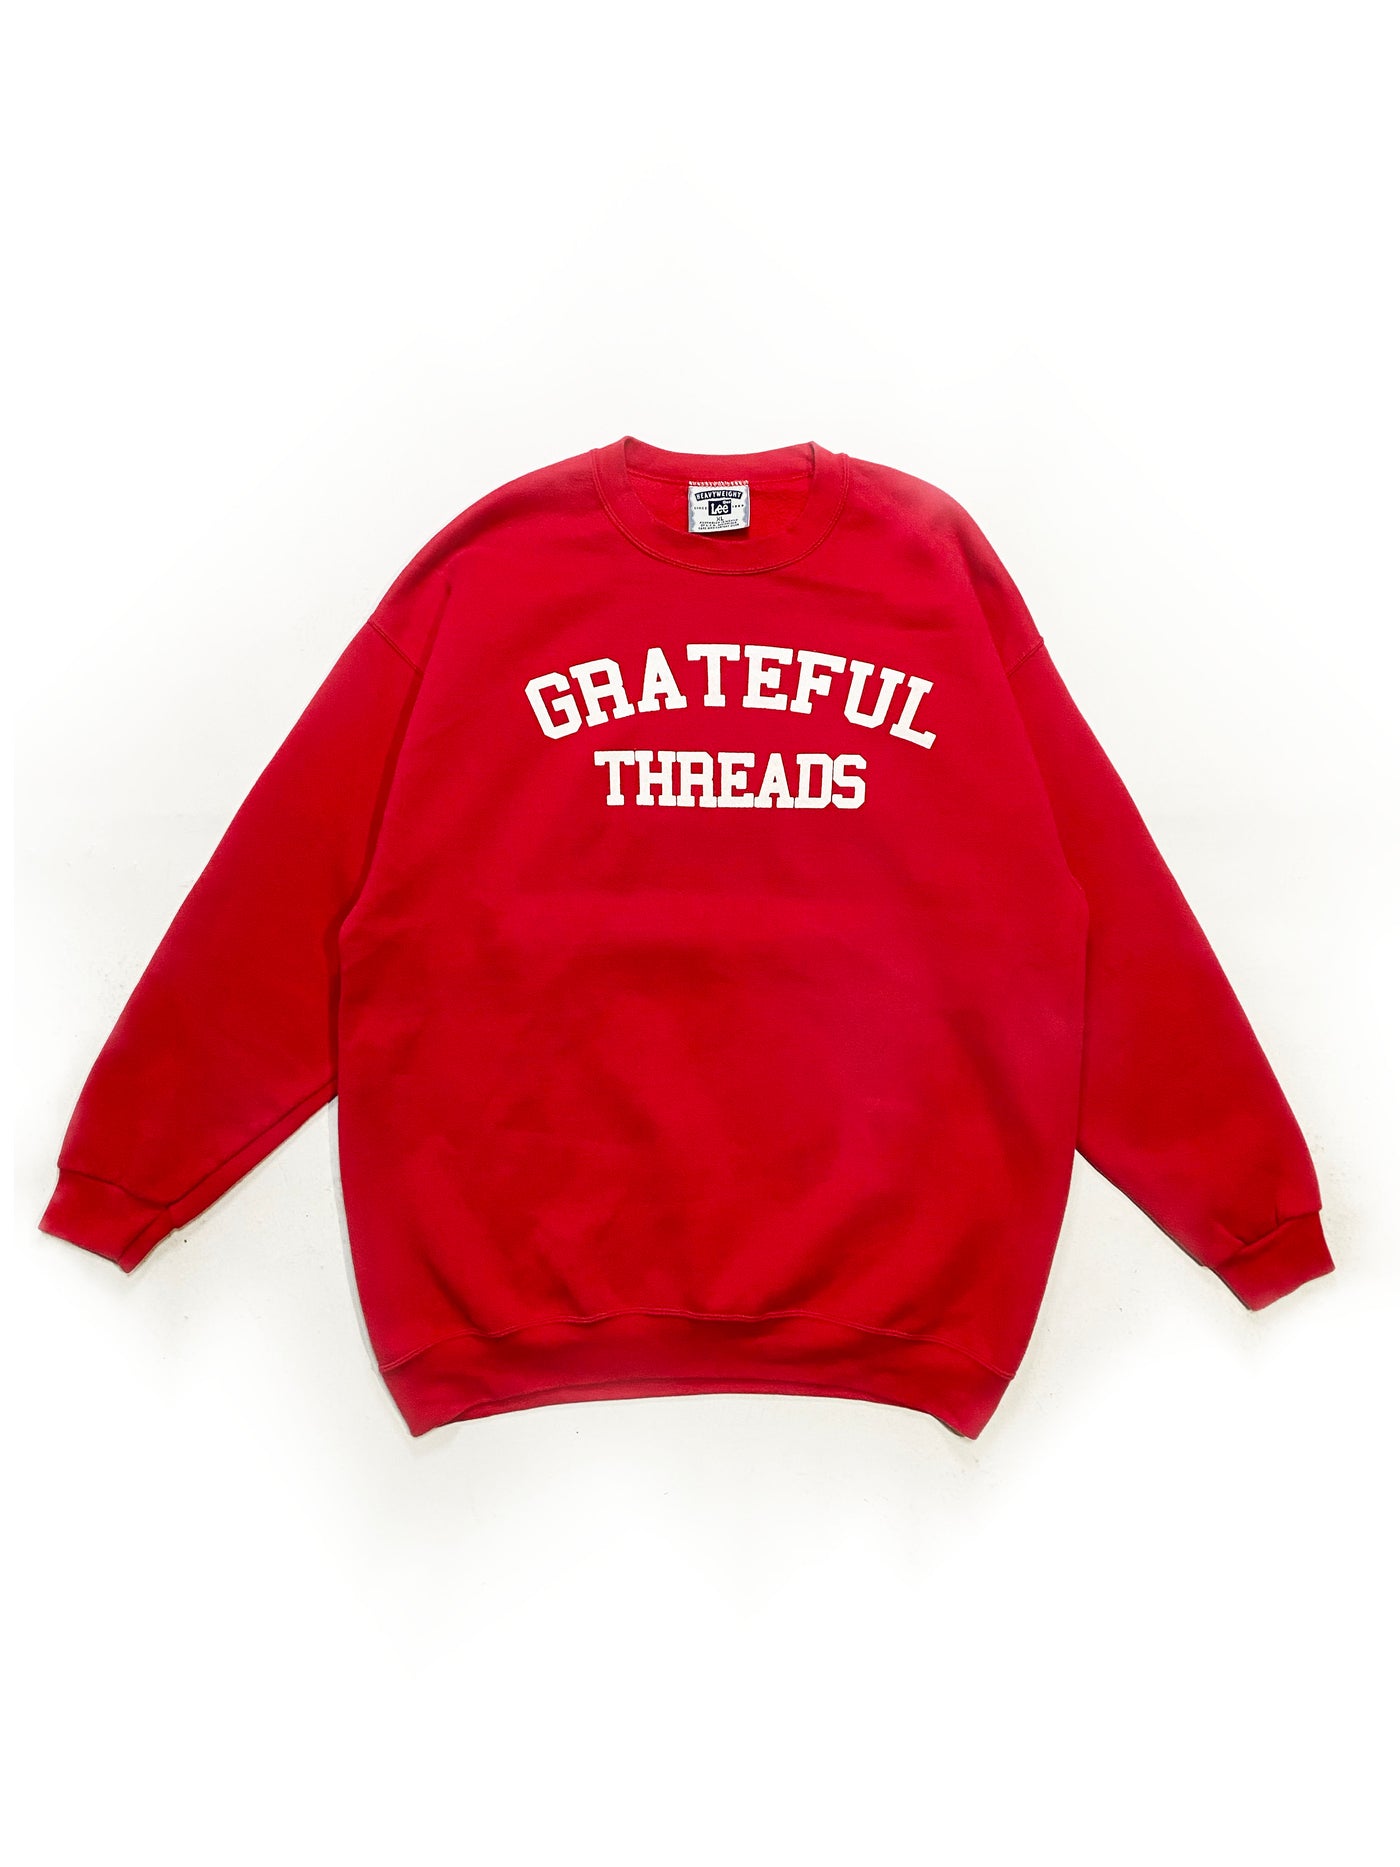 90s Lee Heavy Grateful Threads Spellout Crewneck - Red - Size XL